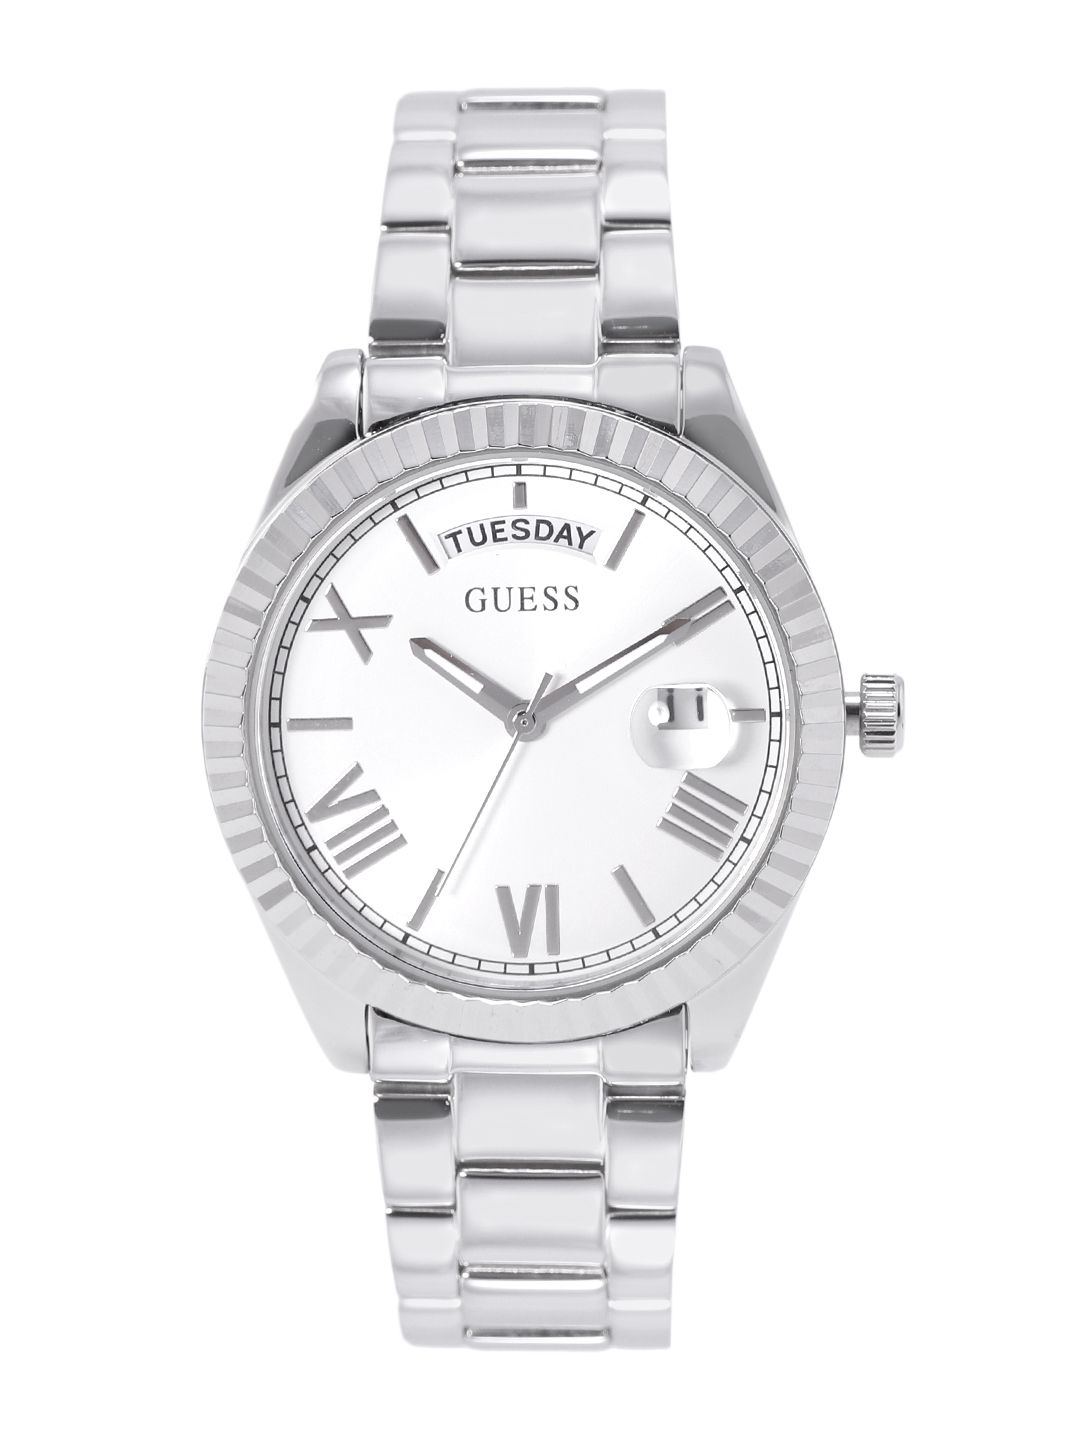 GUESS Women Silver-Toned Dial & Stainless Steel Bracelet Straps Analogue Watch GW0308L1 Price in India